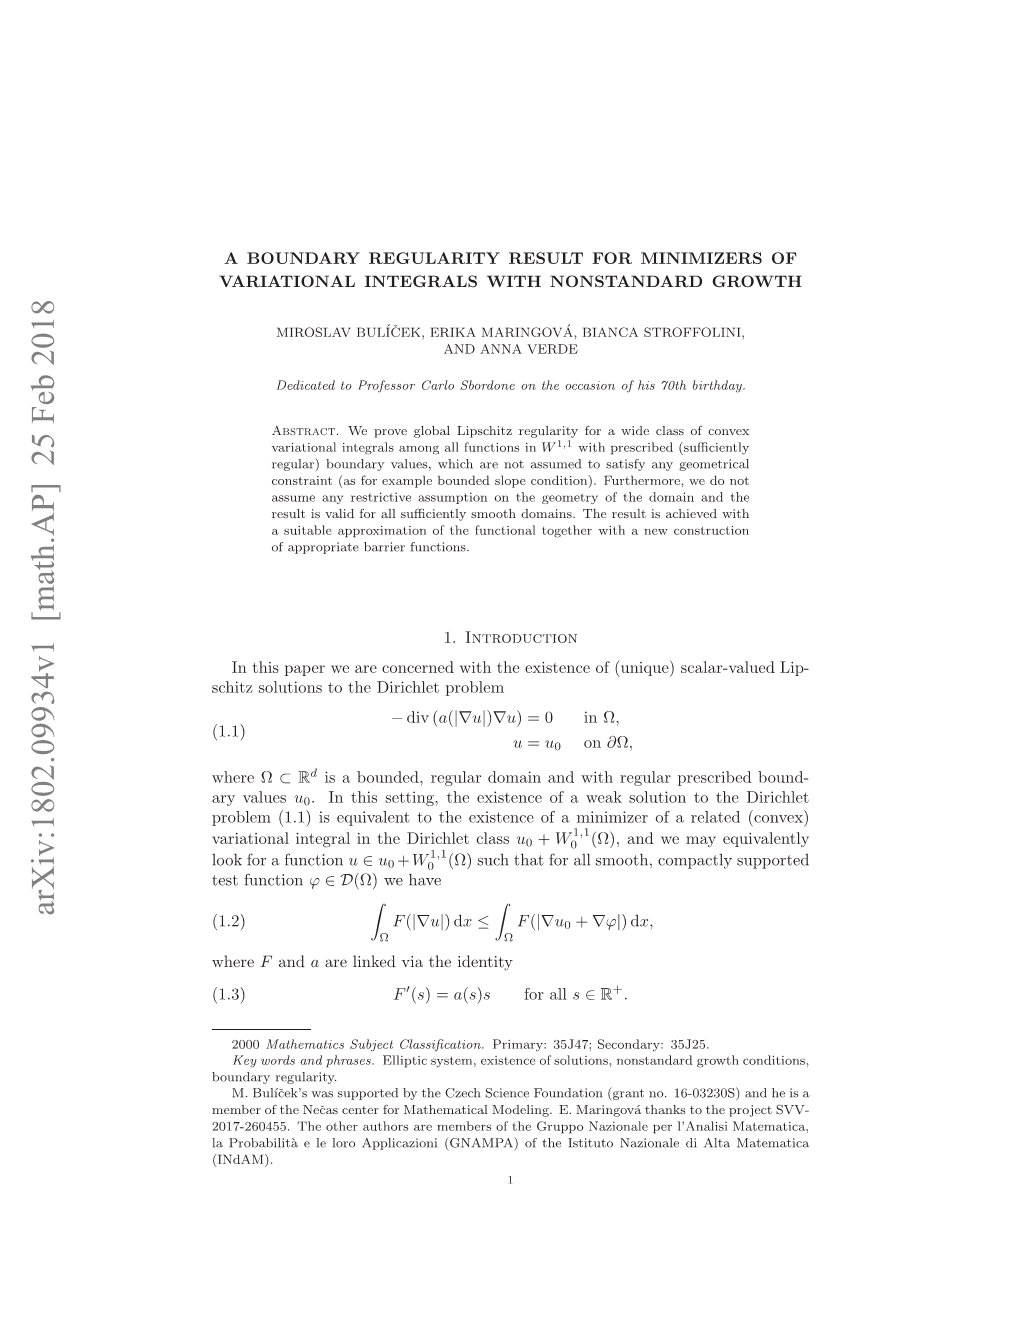 A Boundary Regularity Result for Minimizers of Variational Integrals